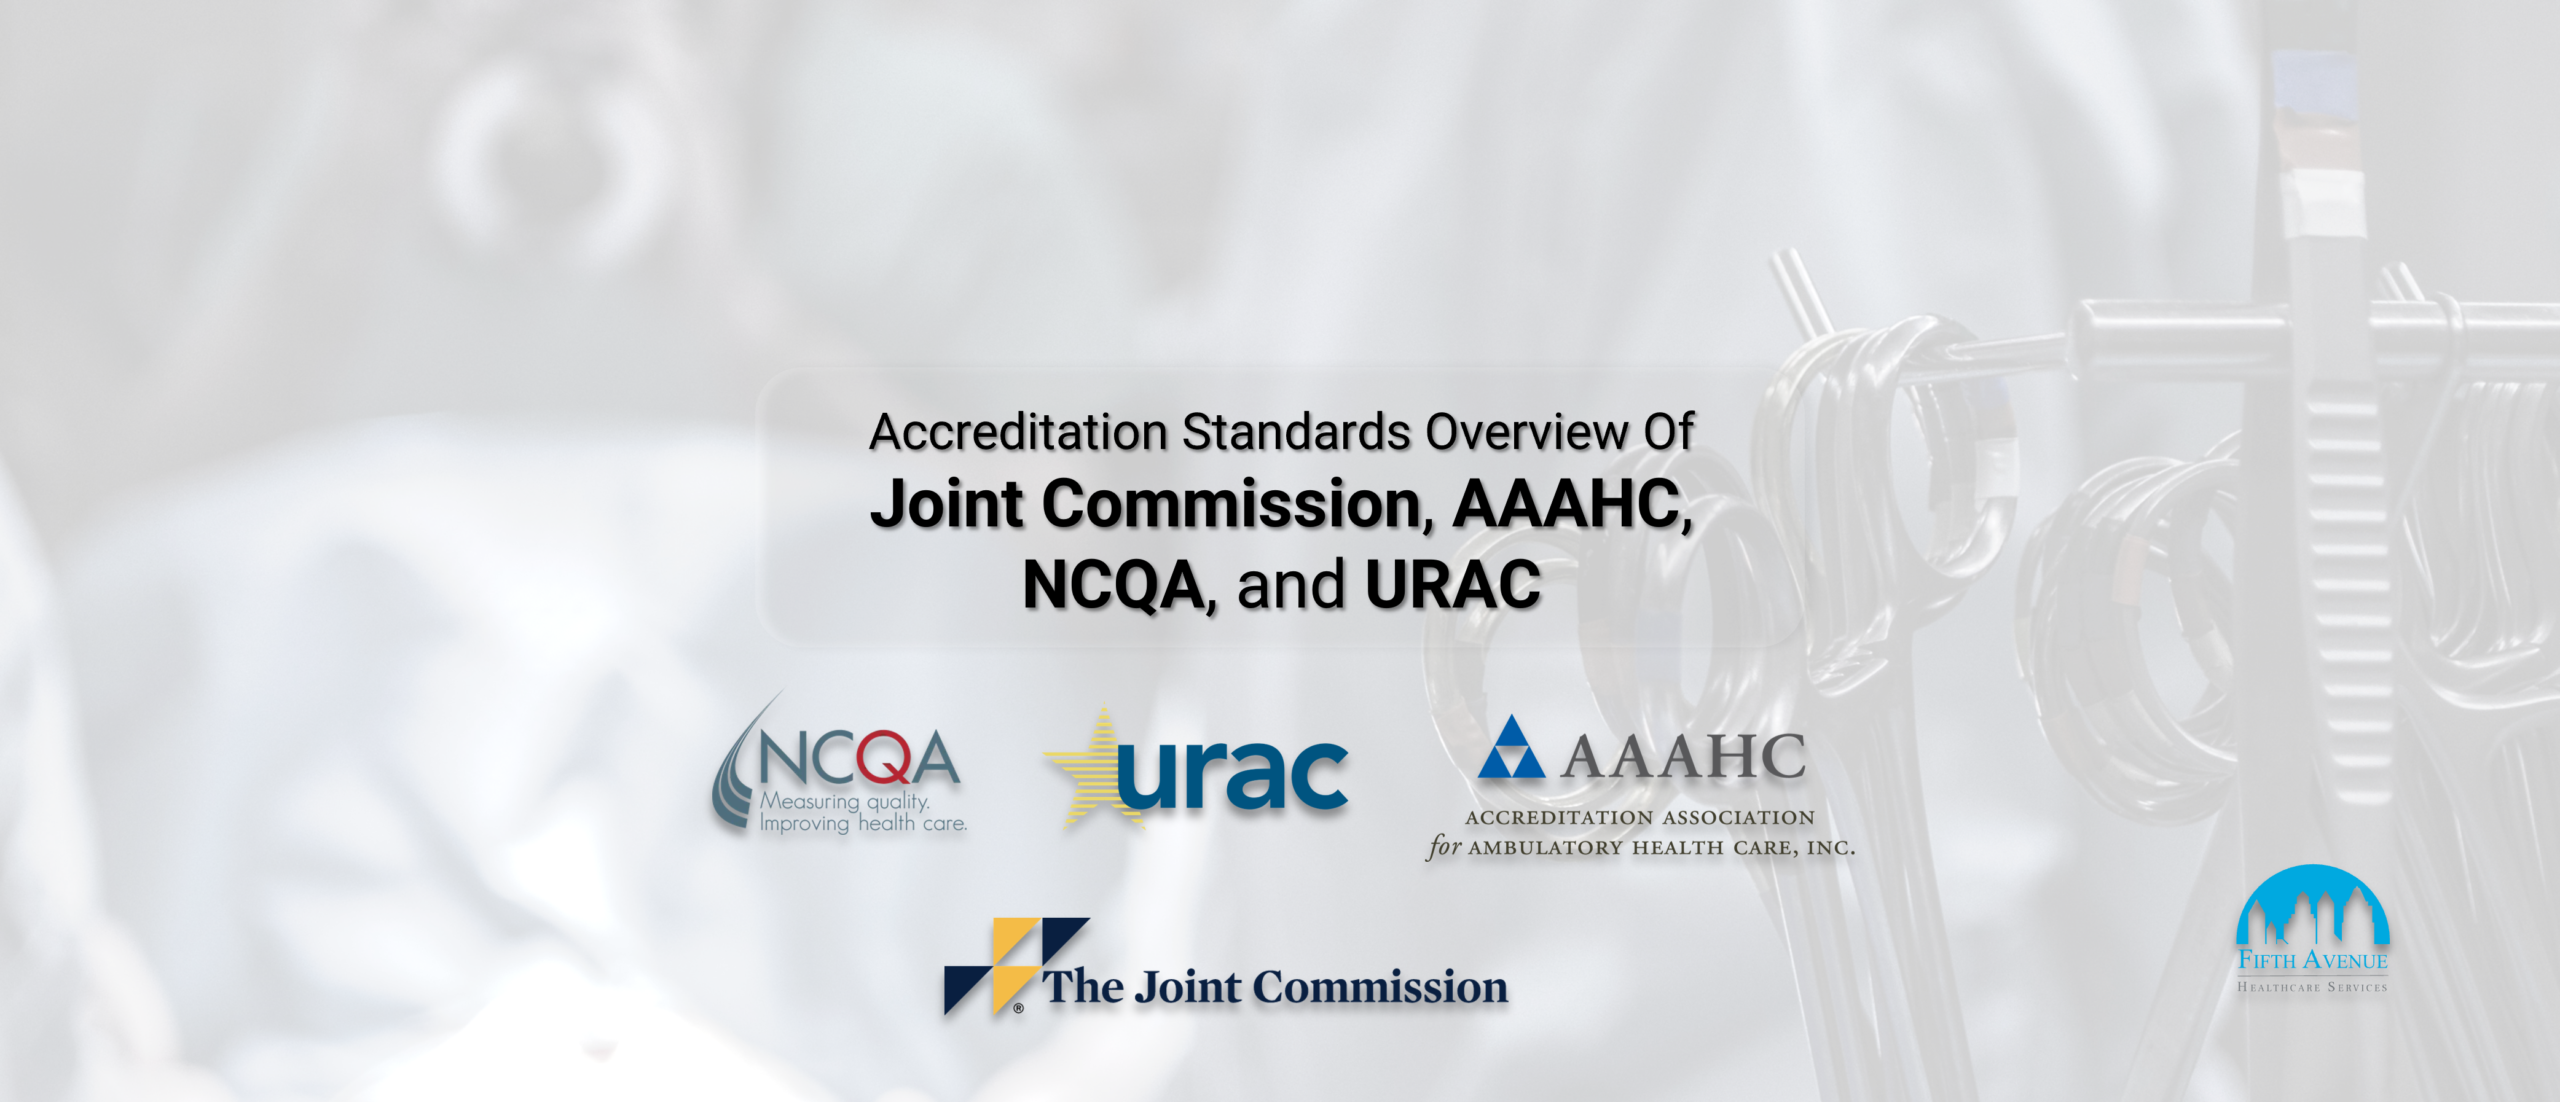 Accreditation Standards Of Joint Commission, AAAHC, NCQA, and URAC